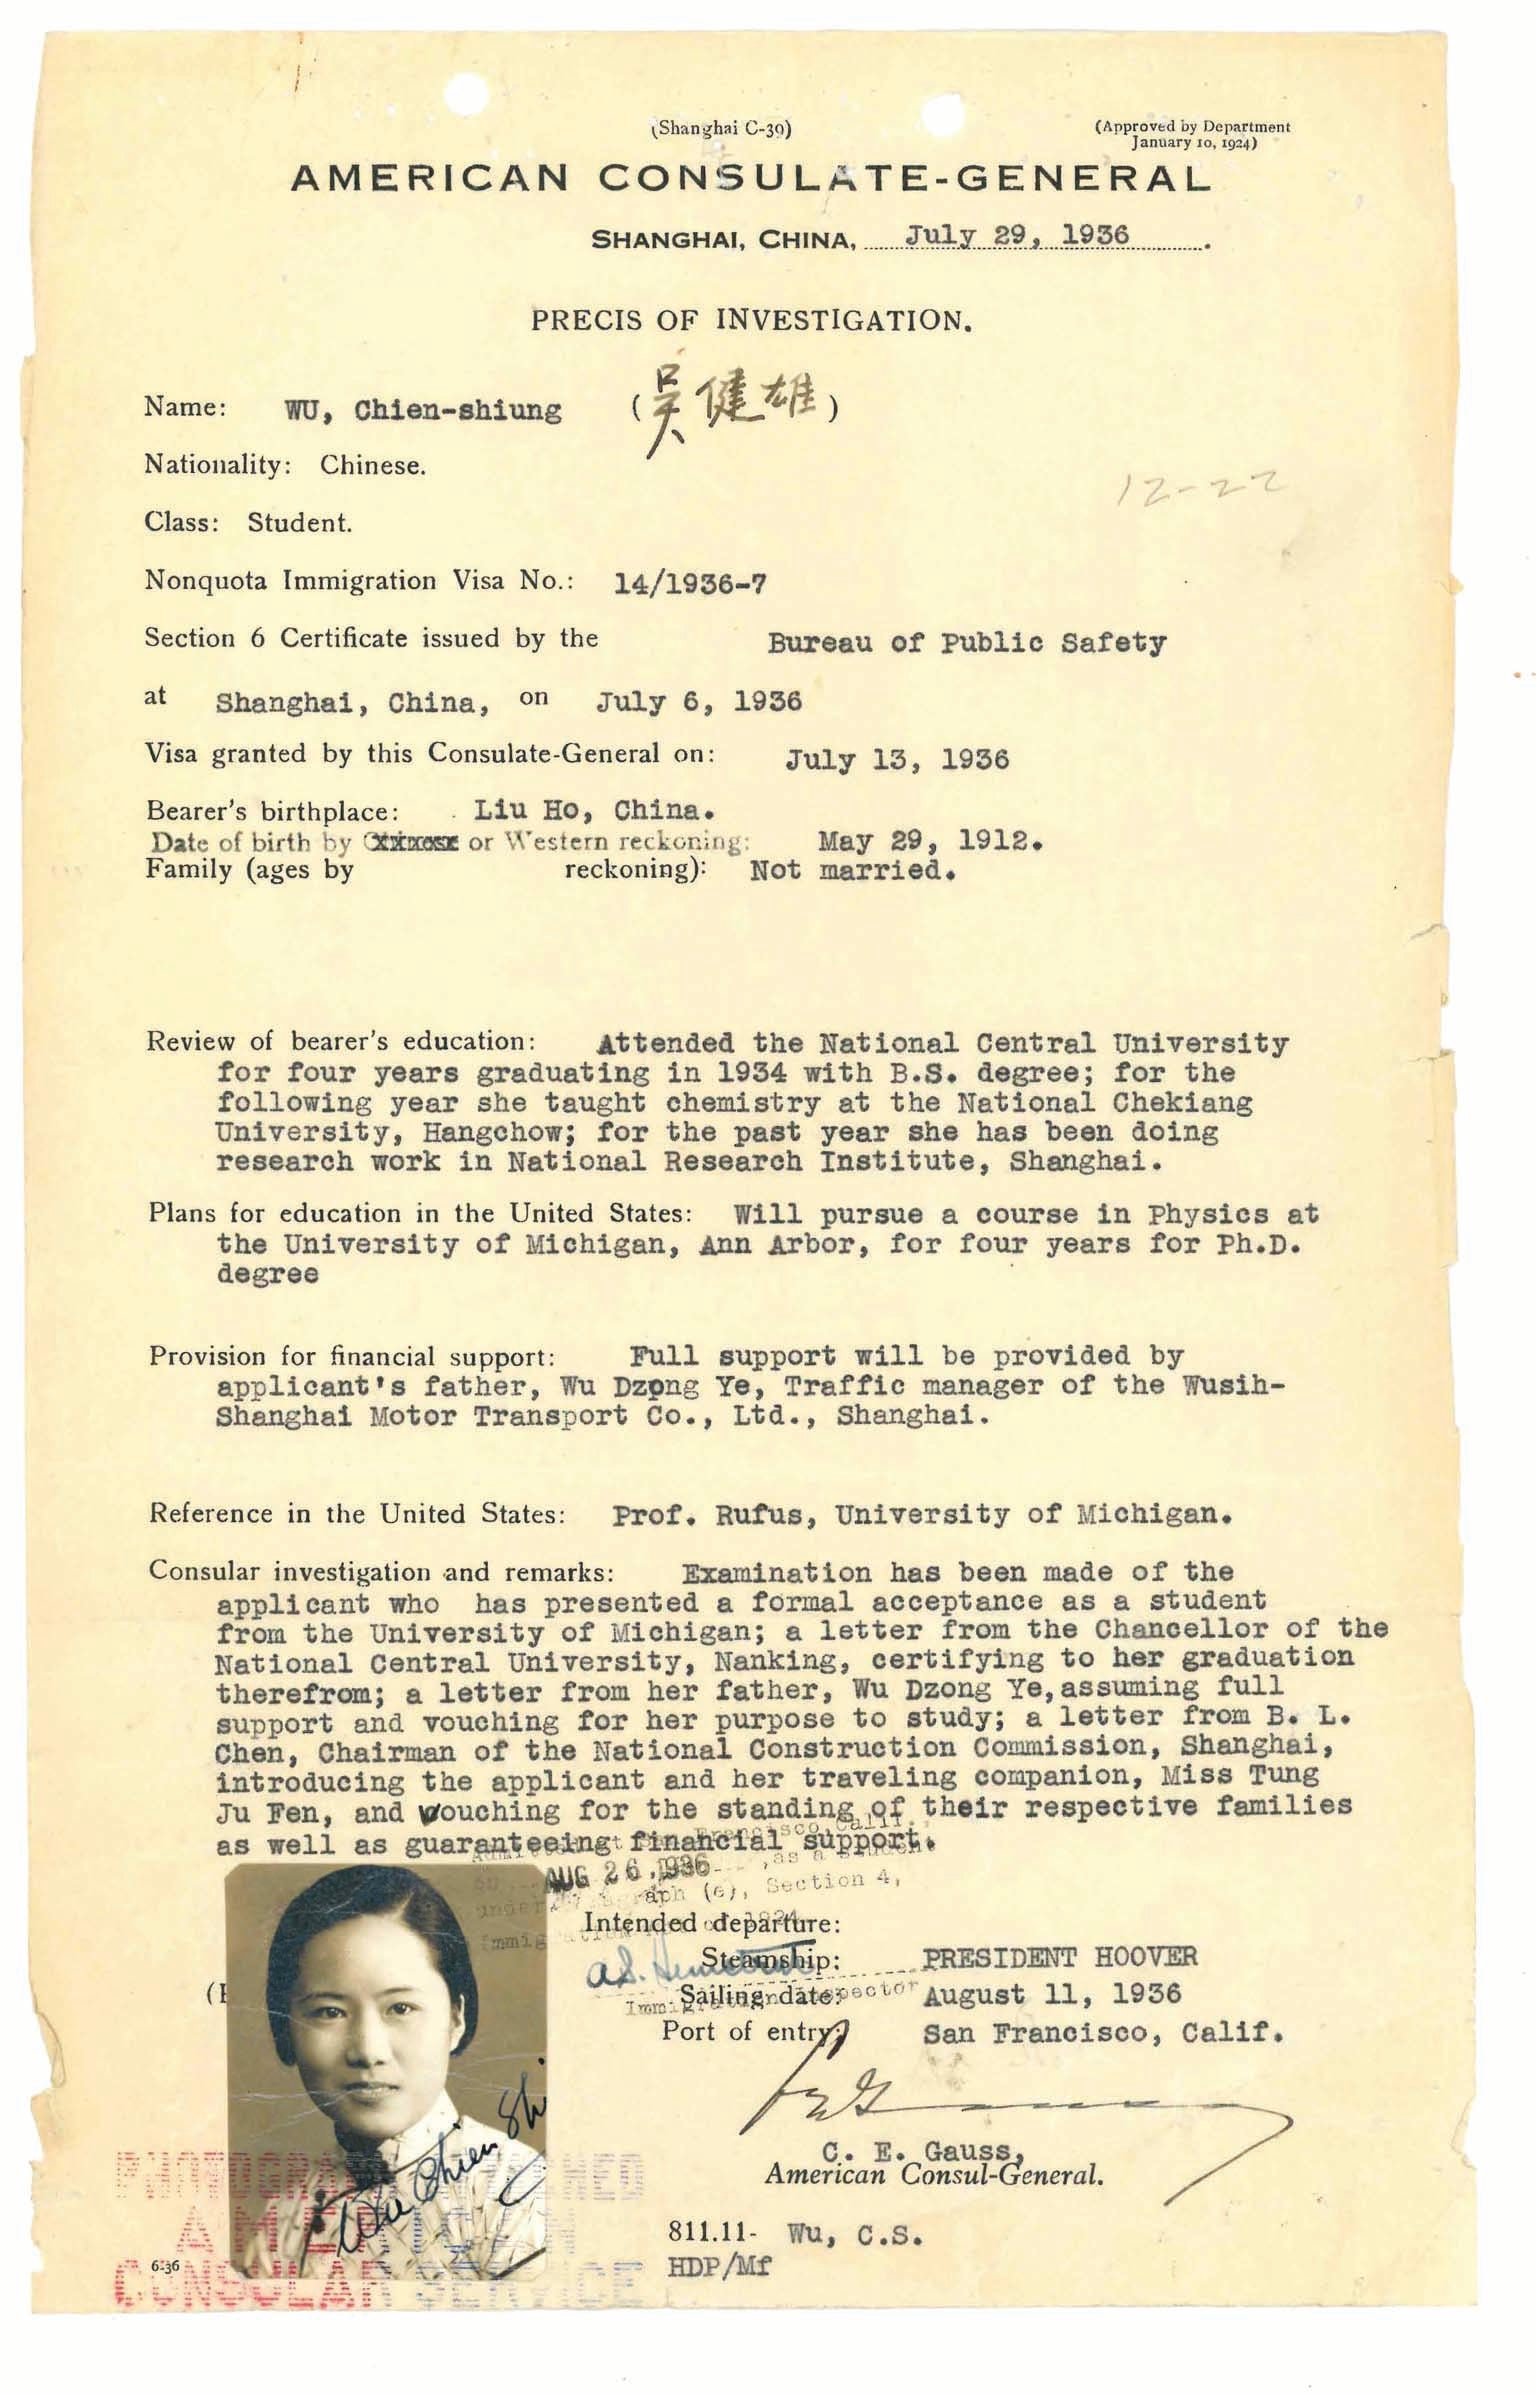 Document identified as an immigration file with photo of Chien-Shiung Wu on the lower right.